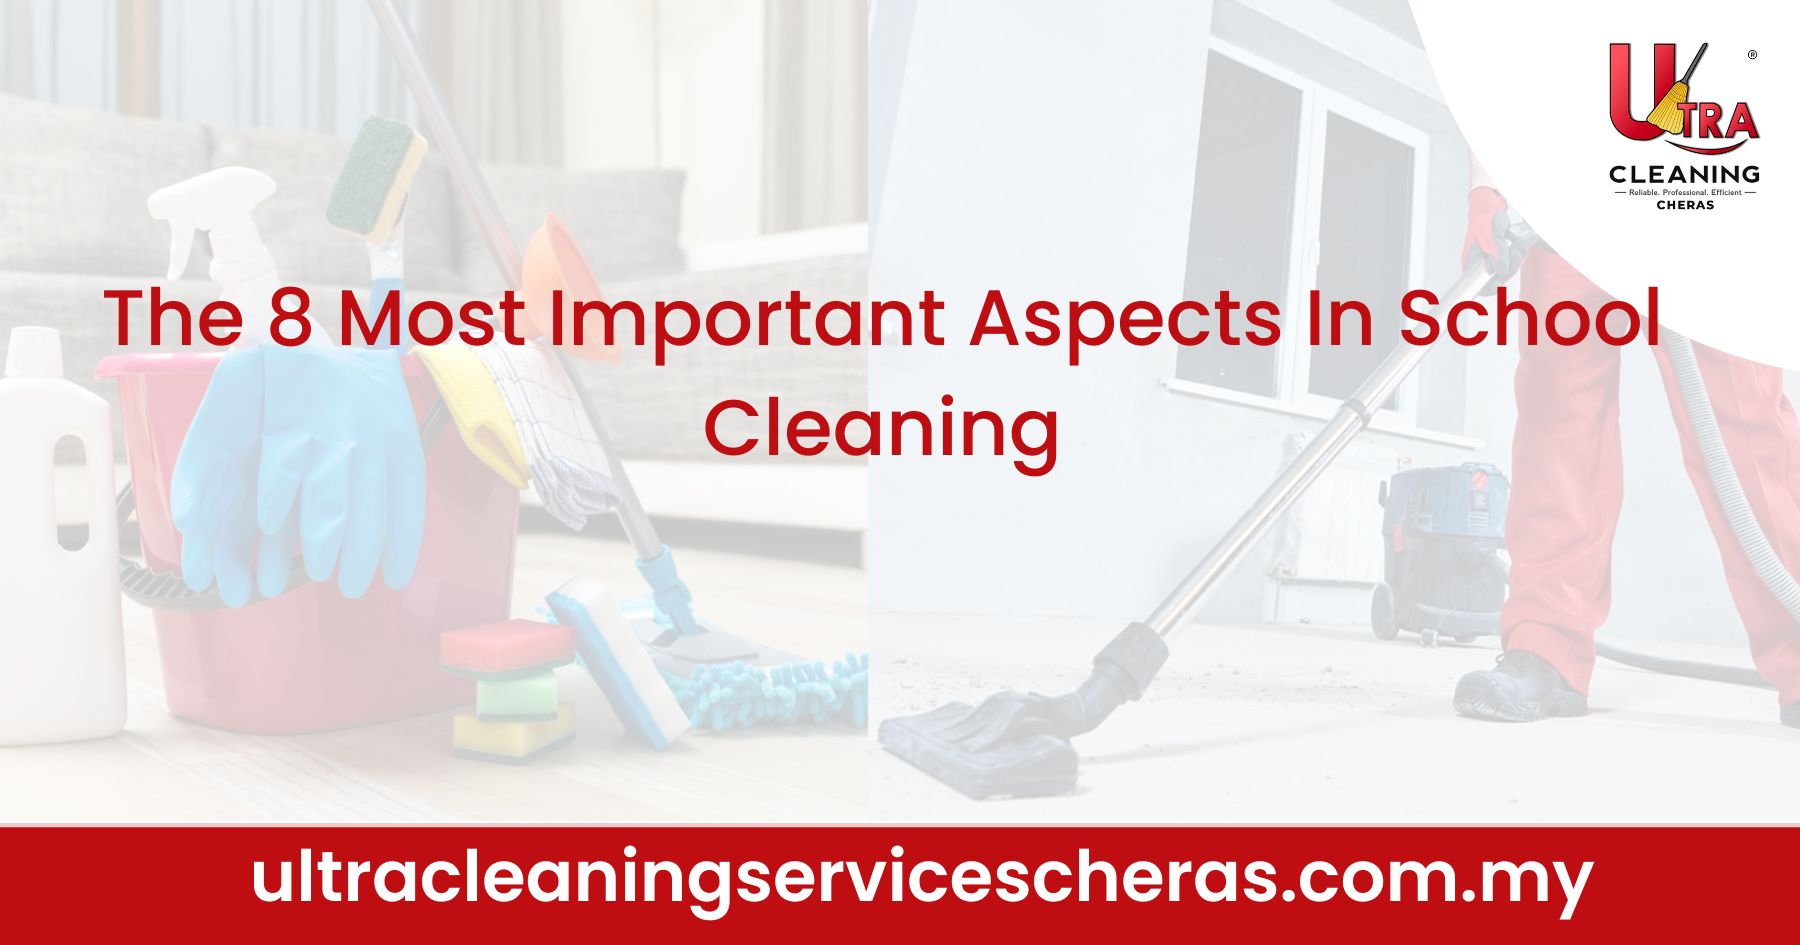 The 8 most important aspects of school cleaning